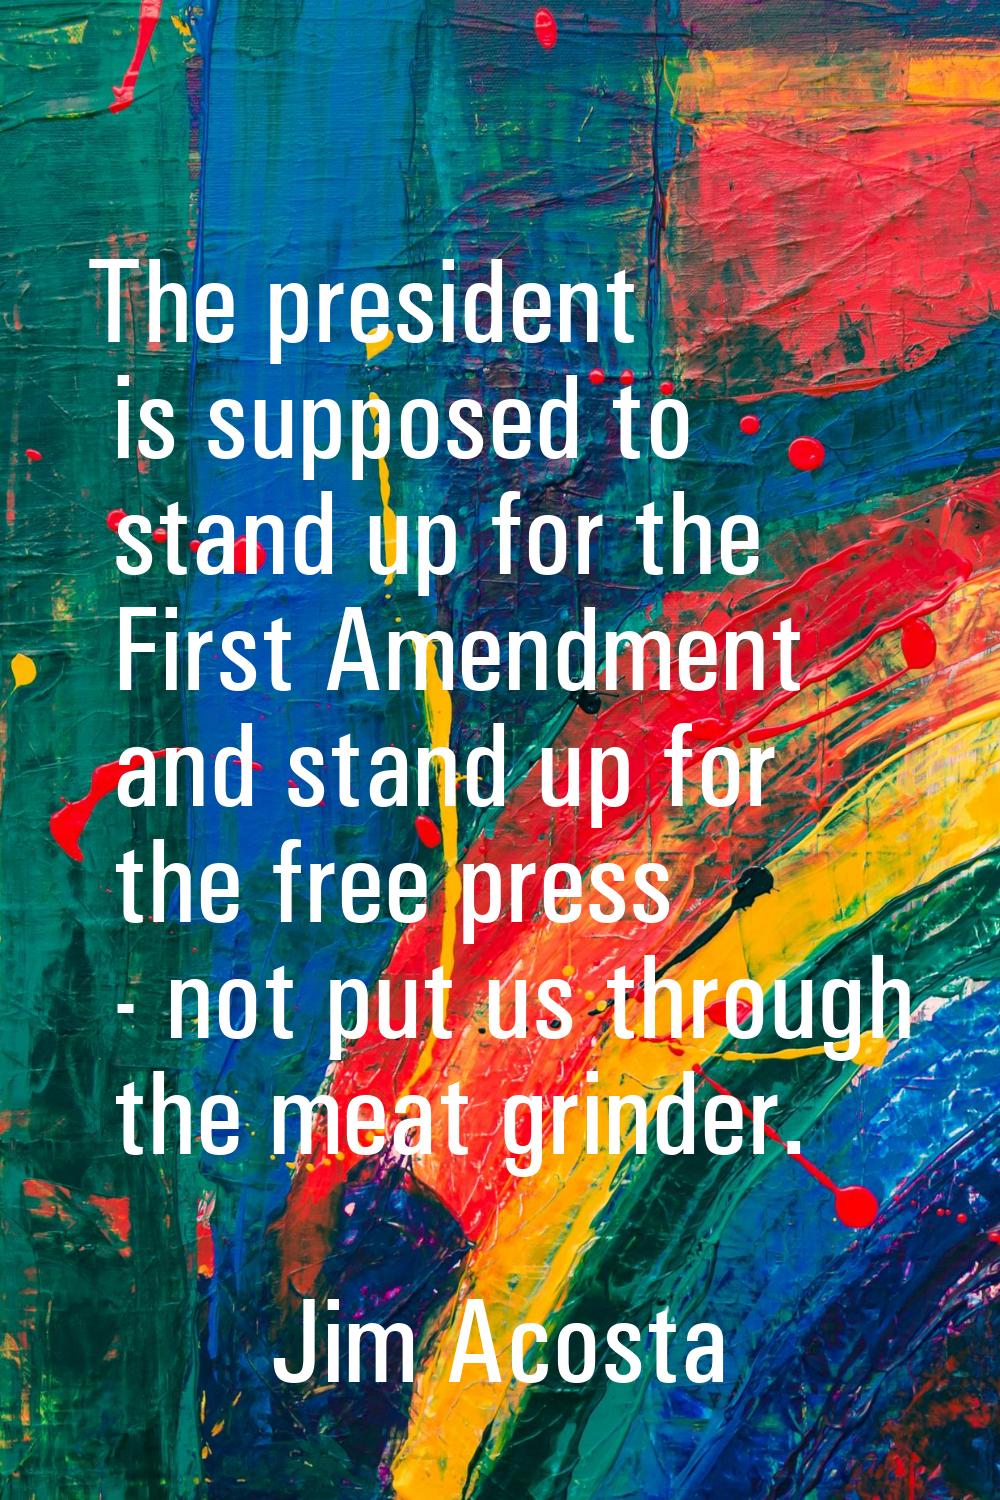 The president is supposed to stand up for the First Amendment and stand up for the free press - not